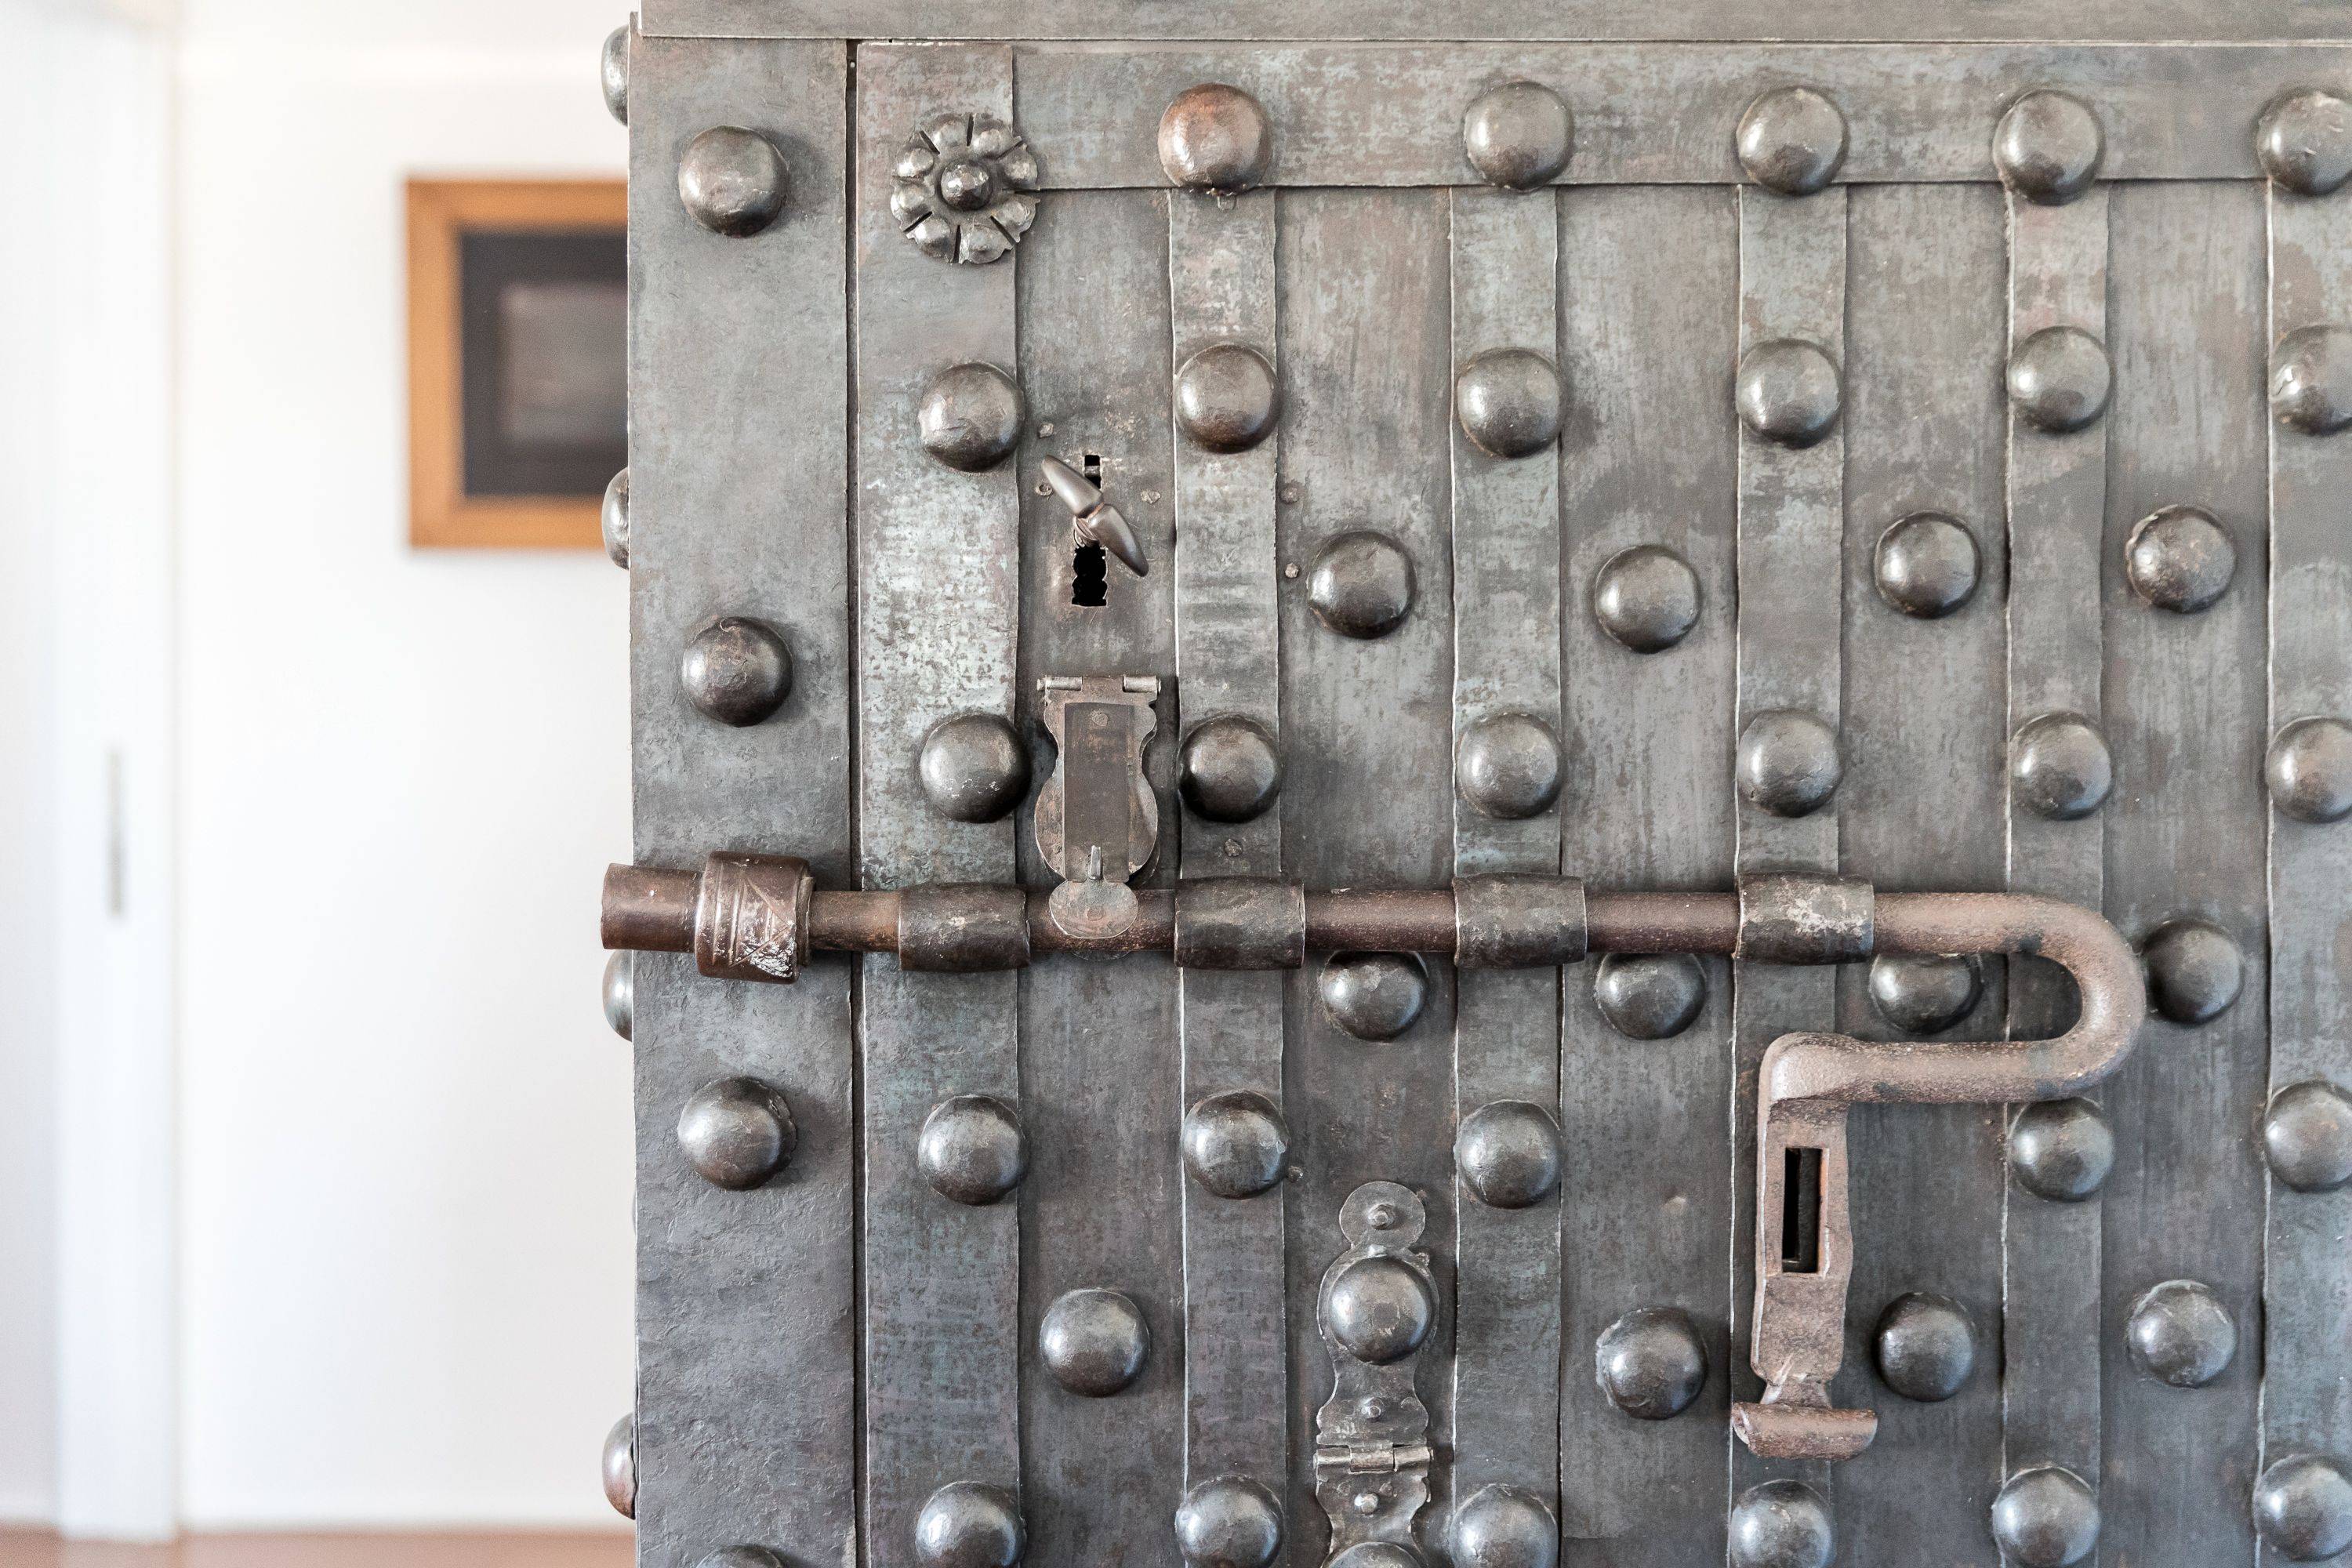 the antique safe is a real masterpiece